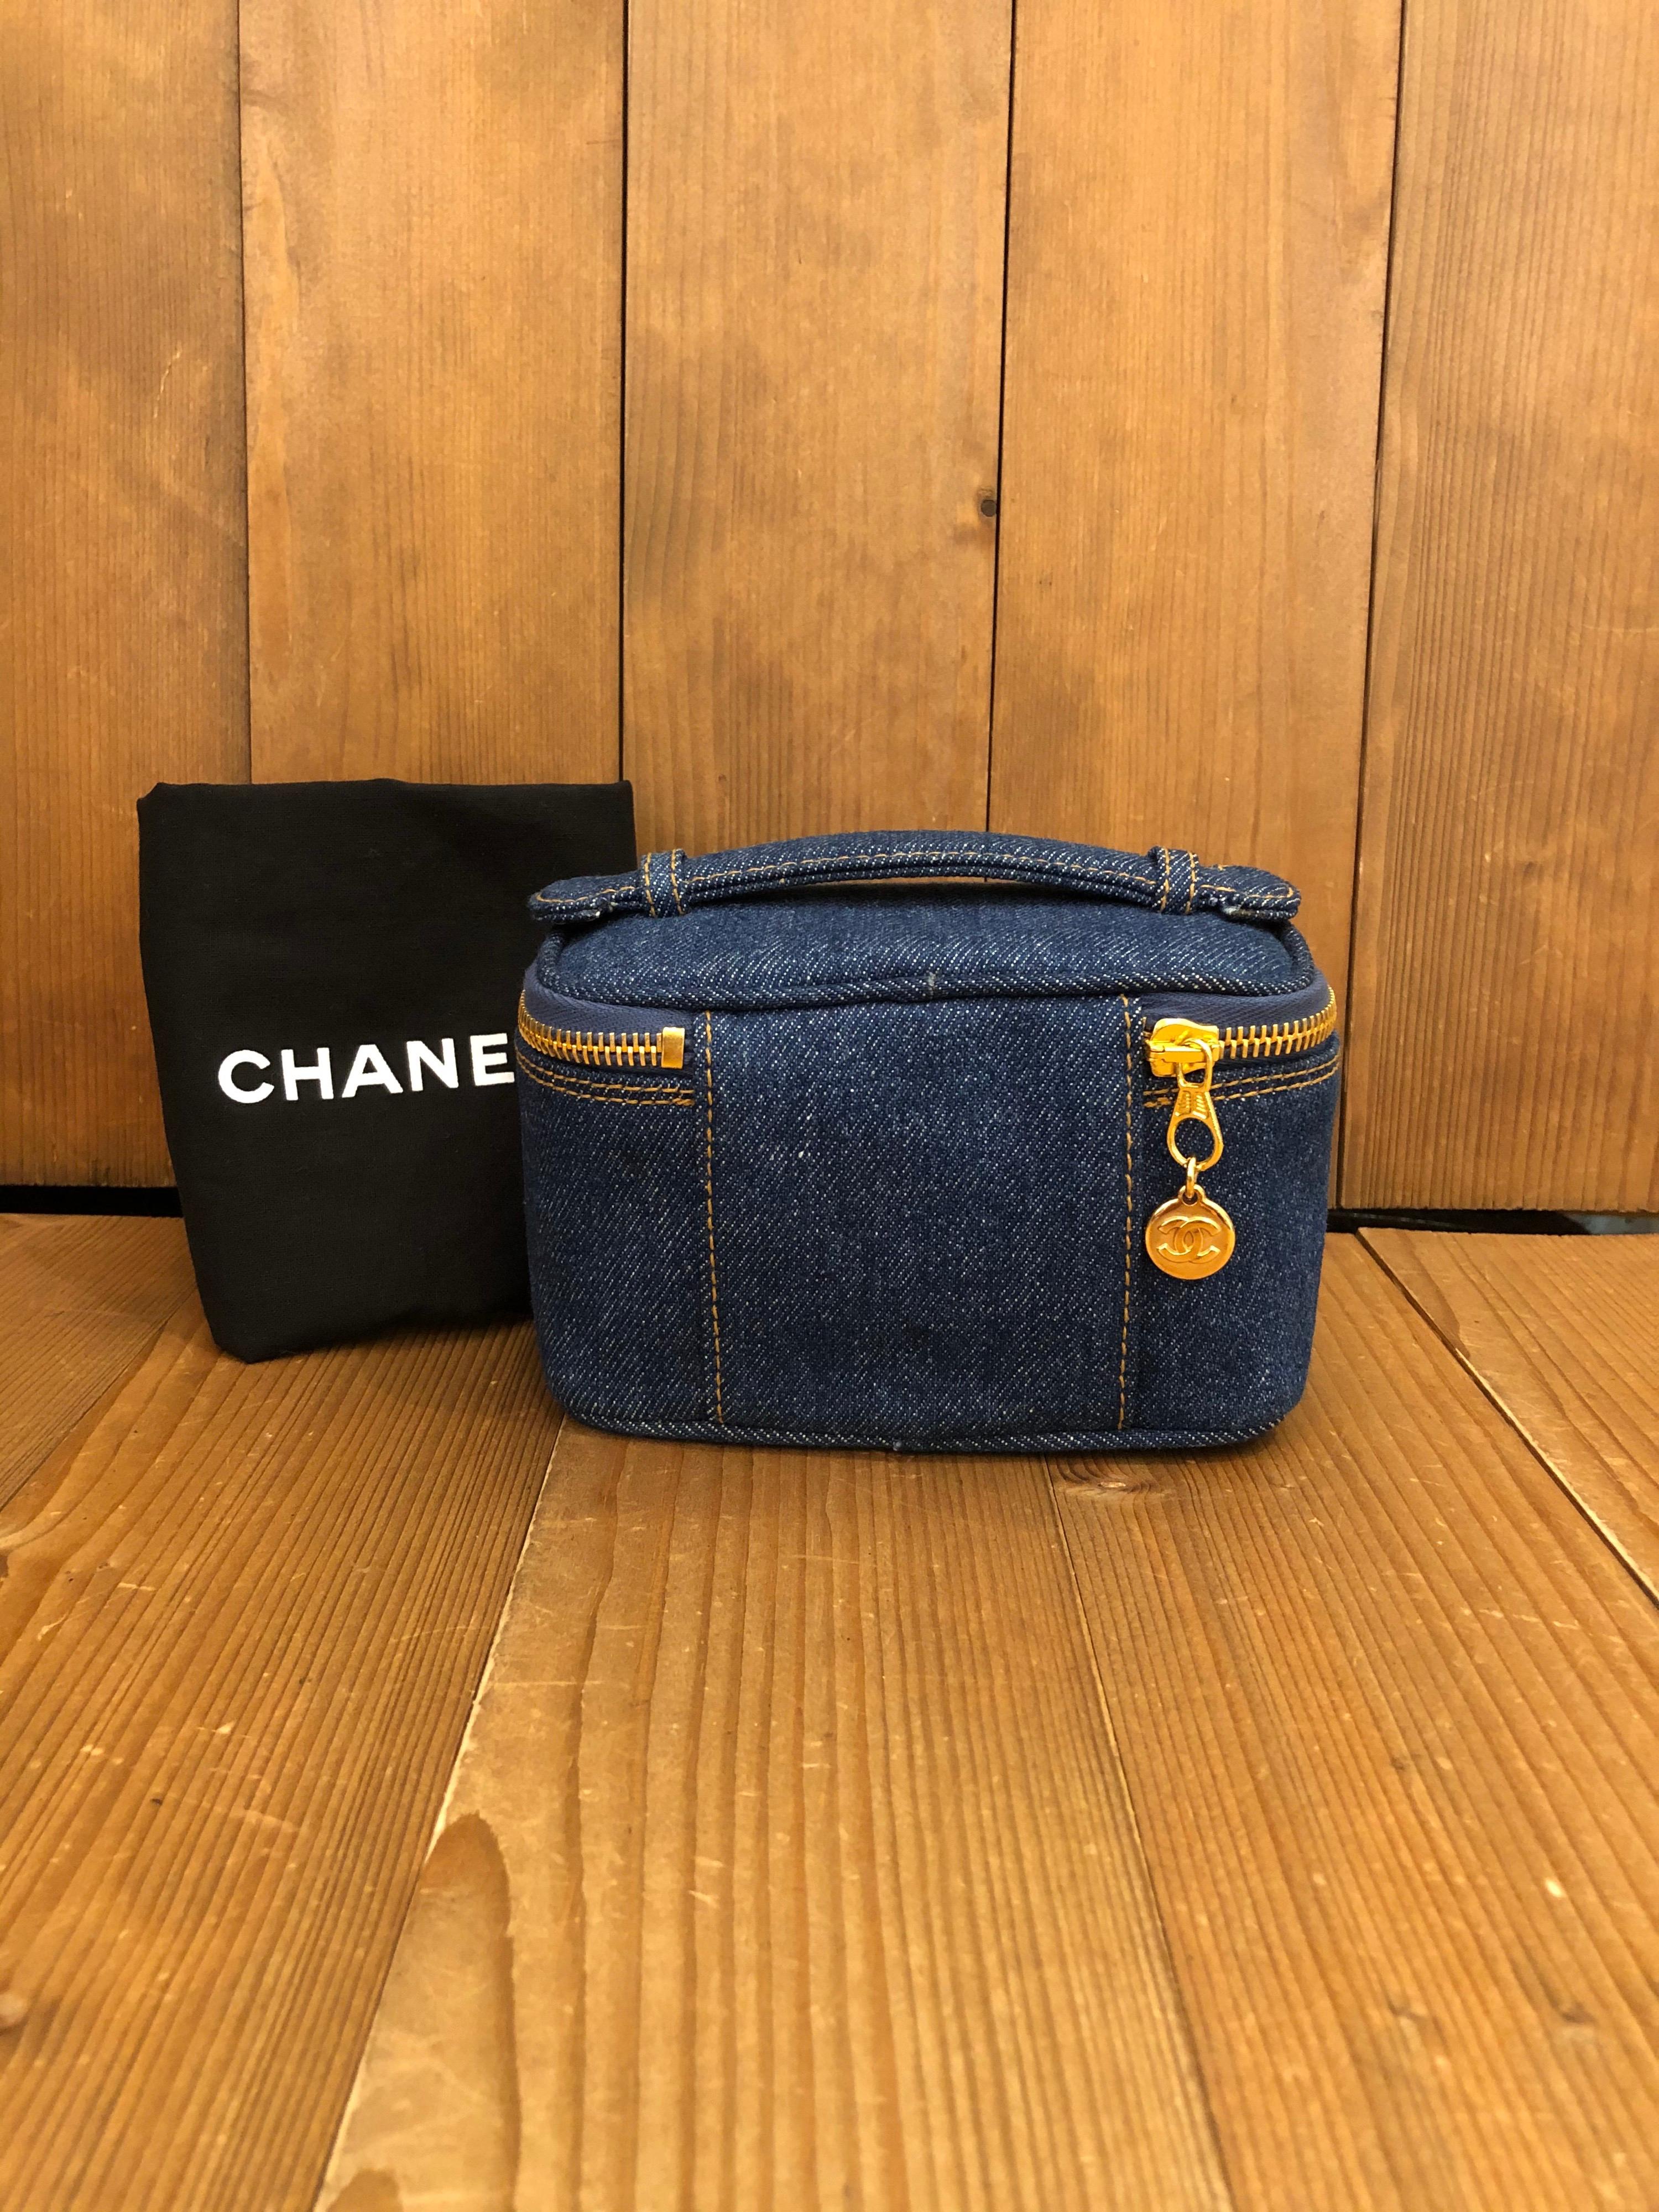 Chanel mini vanity case in denim. Made in Italy. Serial no 4679642. 

Material: Denim/Lambskin leather 
Color: Blue
Measurements: approximately 15.25 x 8.9 x 8.9cm (6 x 3.5 x 3.5 inches)

Comes with: Serial sticker/Dust bag

Condition:
Rank AB